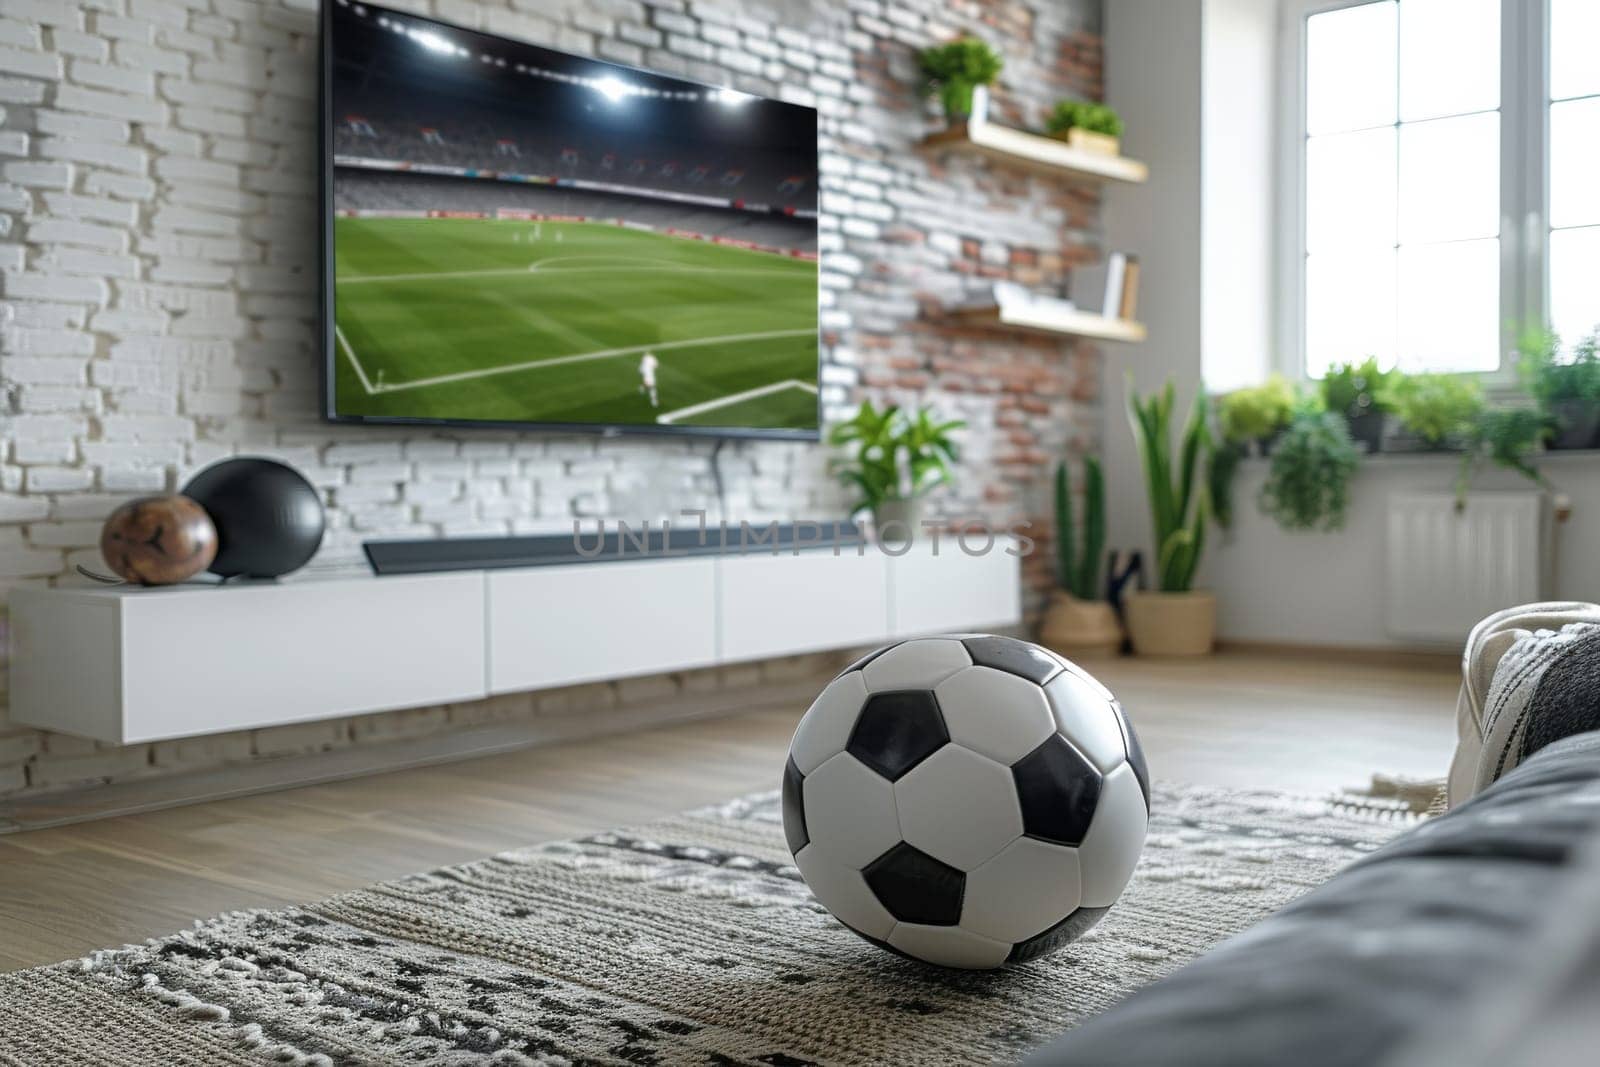 Football or Soccer Tournament concept. A football in living room with TV open Live match.